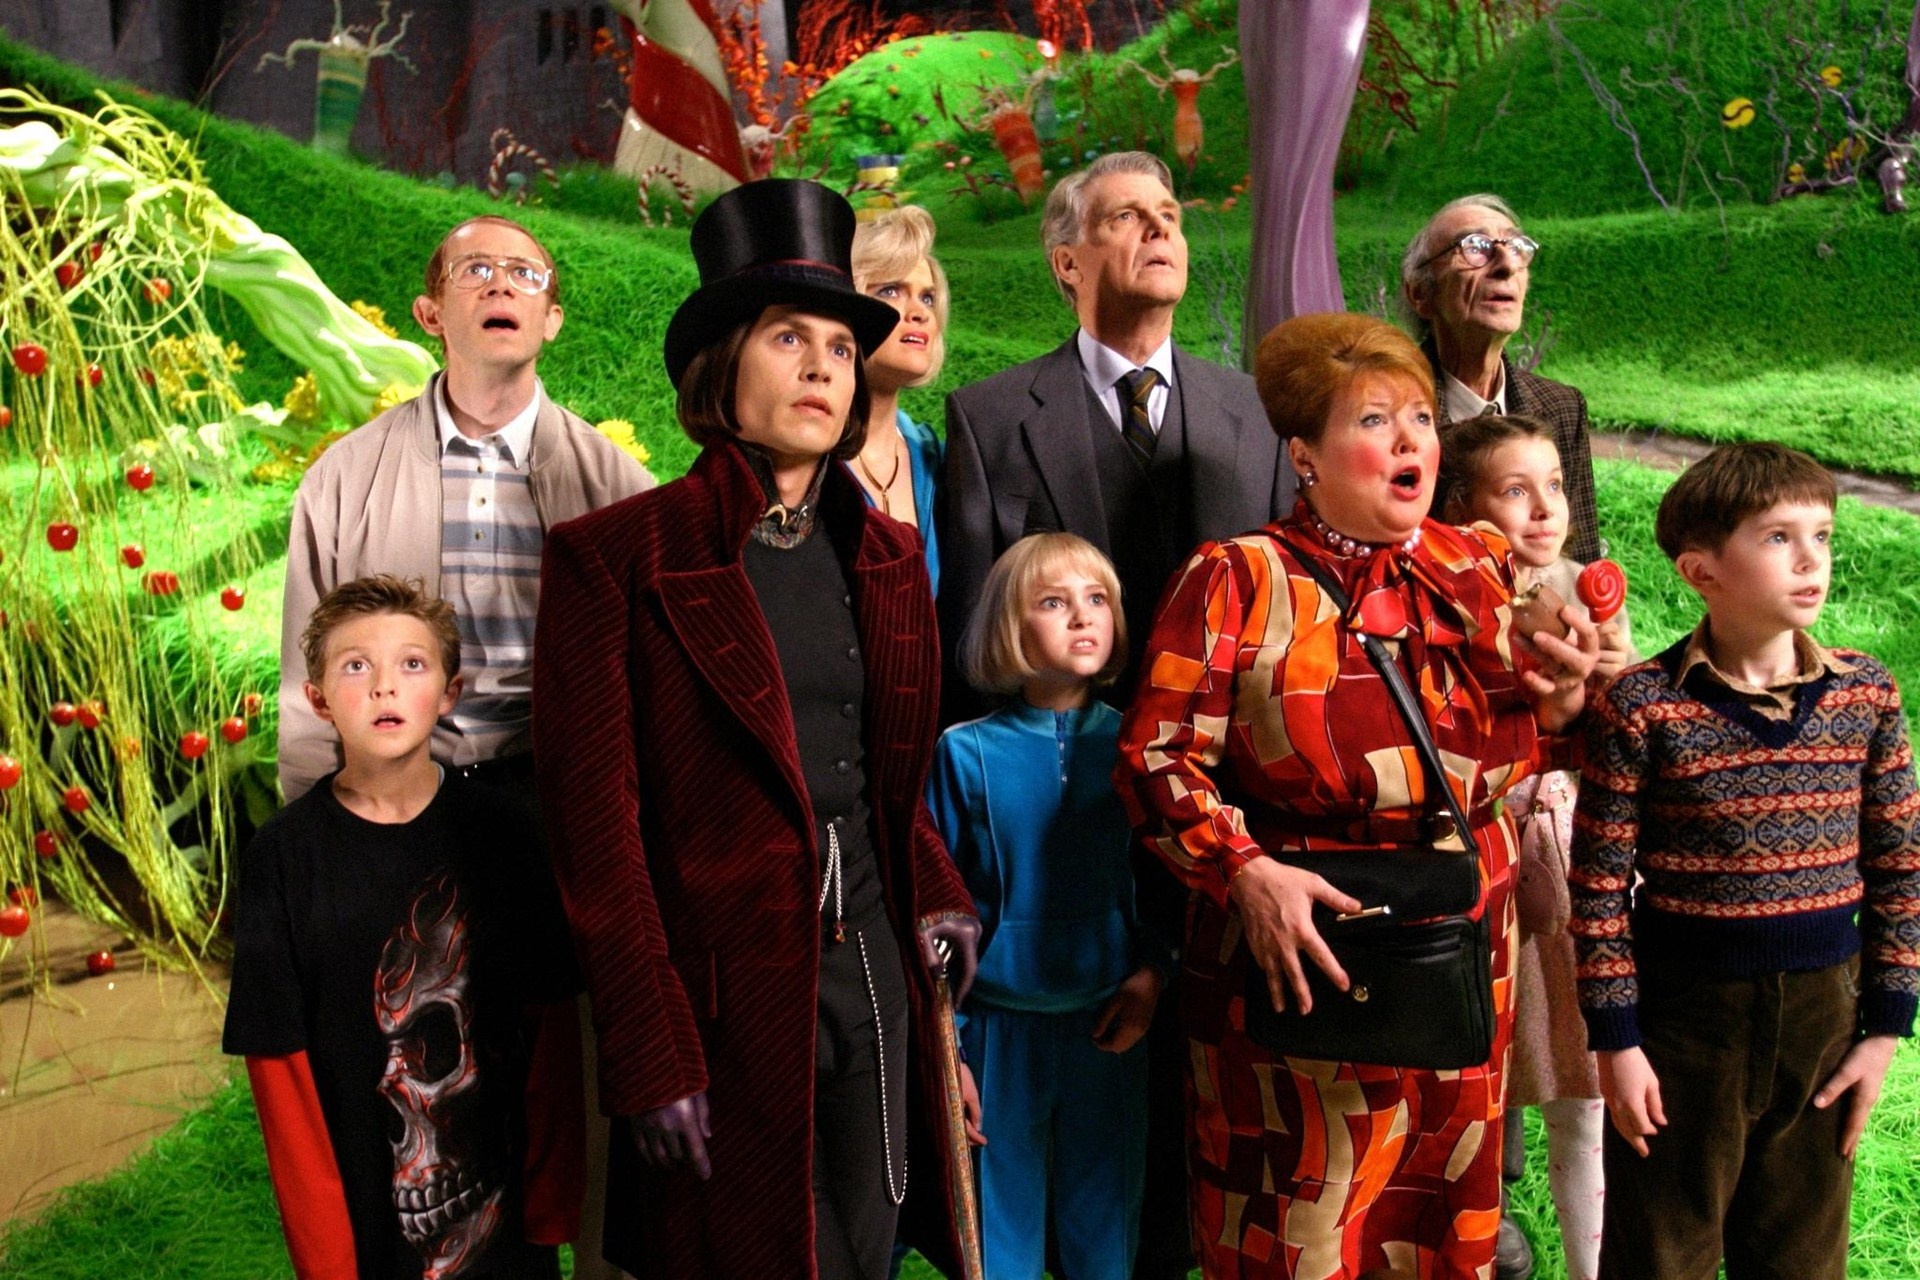 Charlie and the Chocolate Factory, HQ Wallpapers, 4k, 2019, 1920x1280 HD Desktop